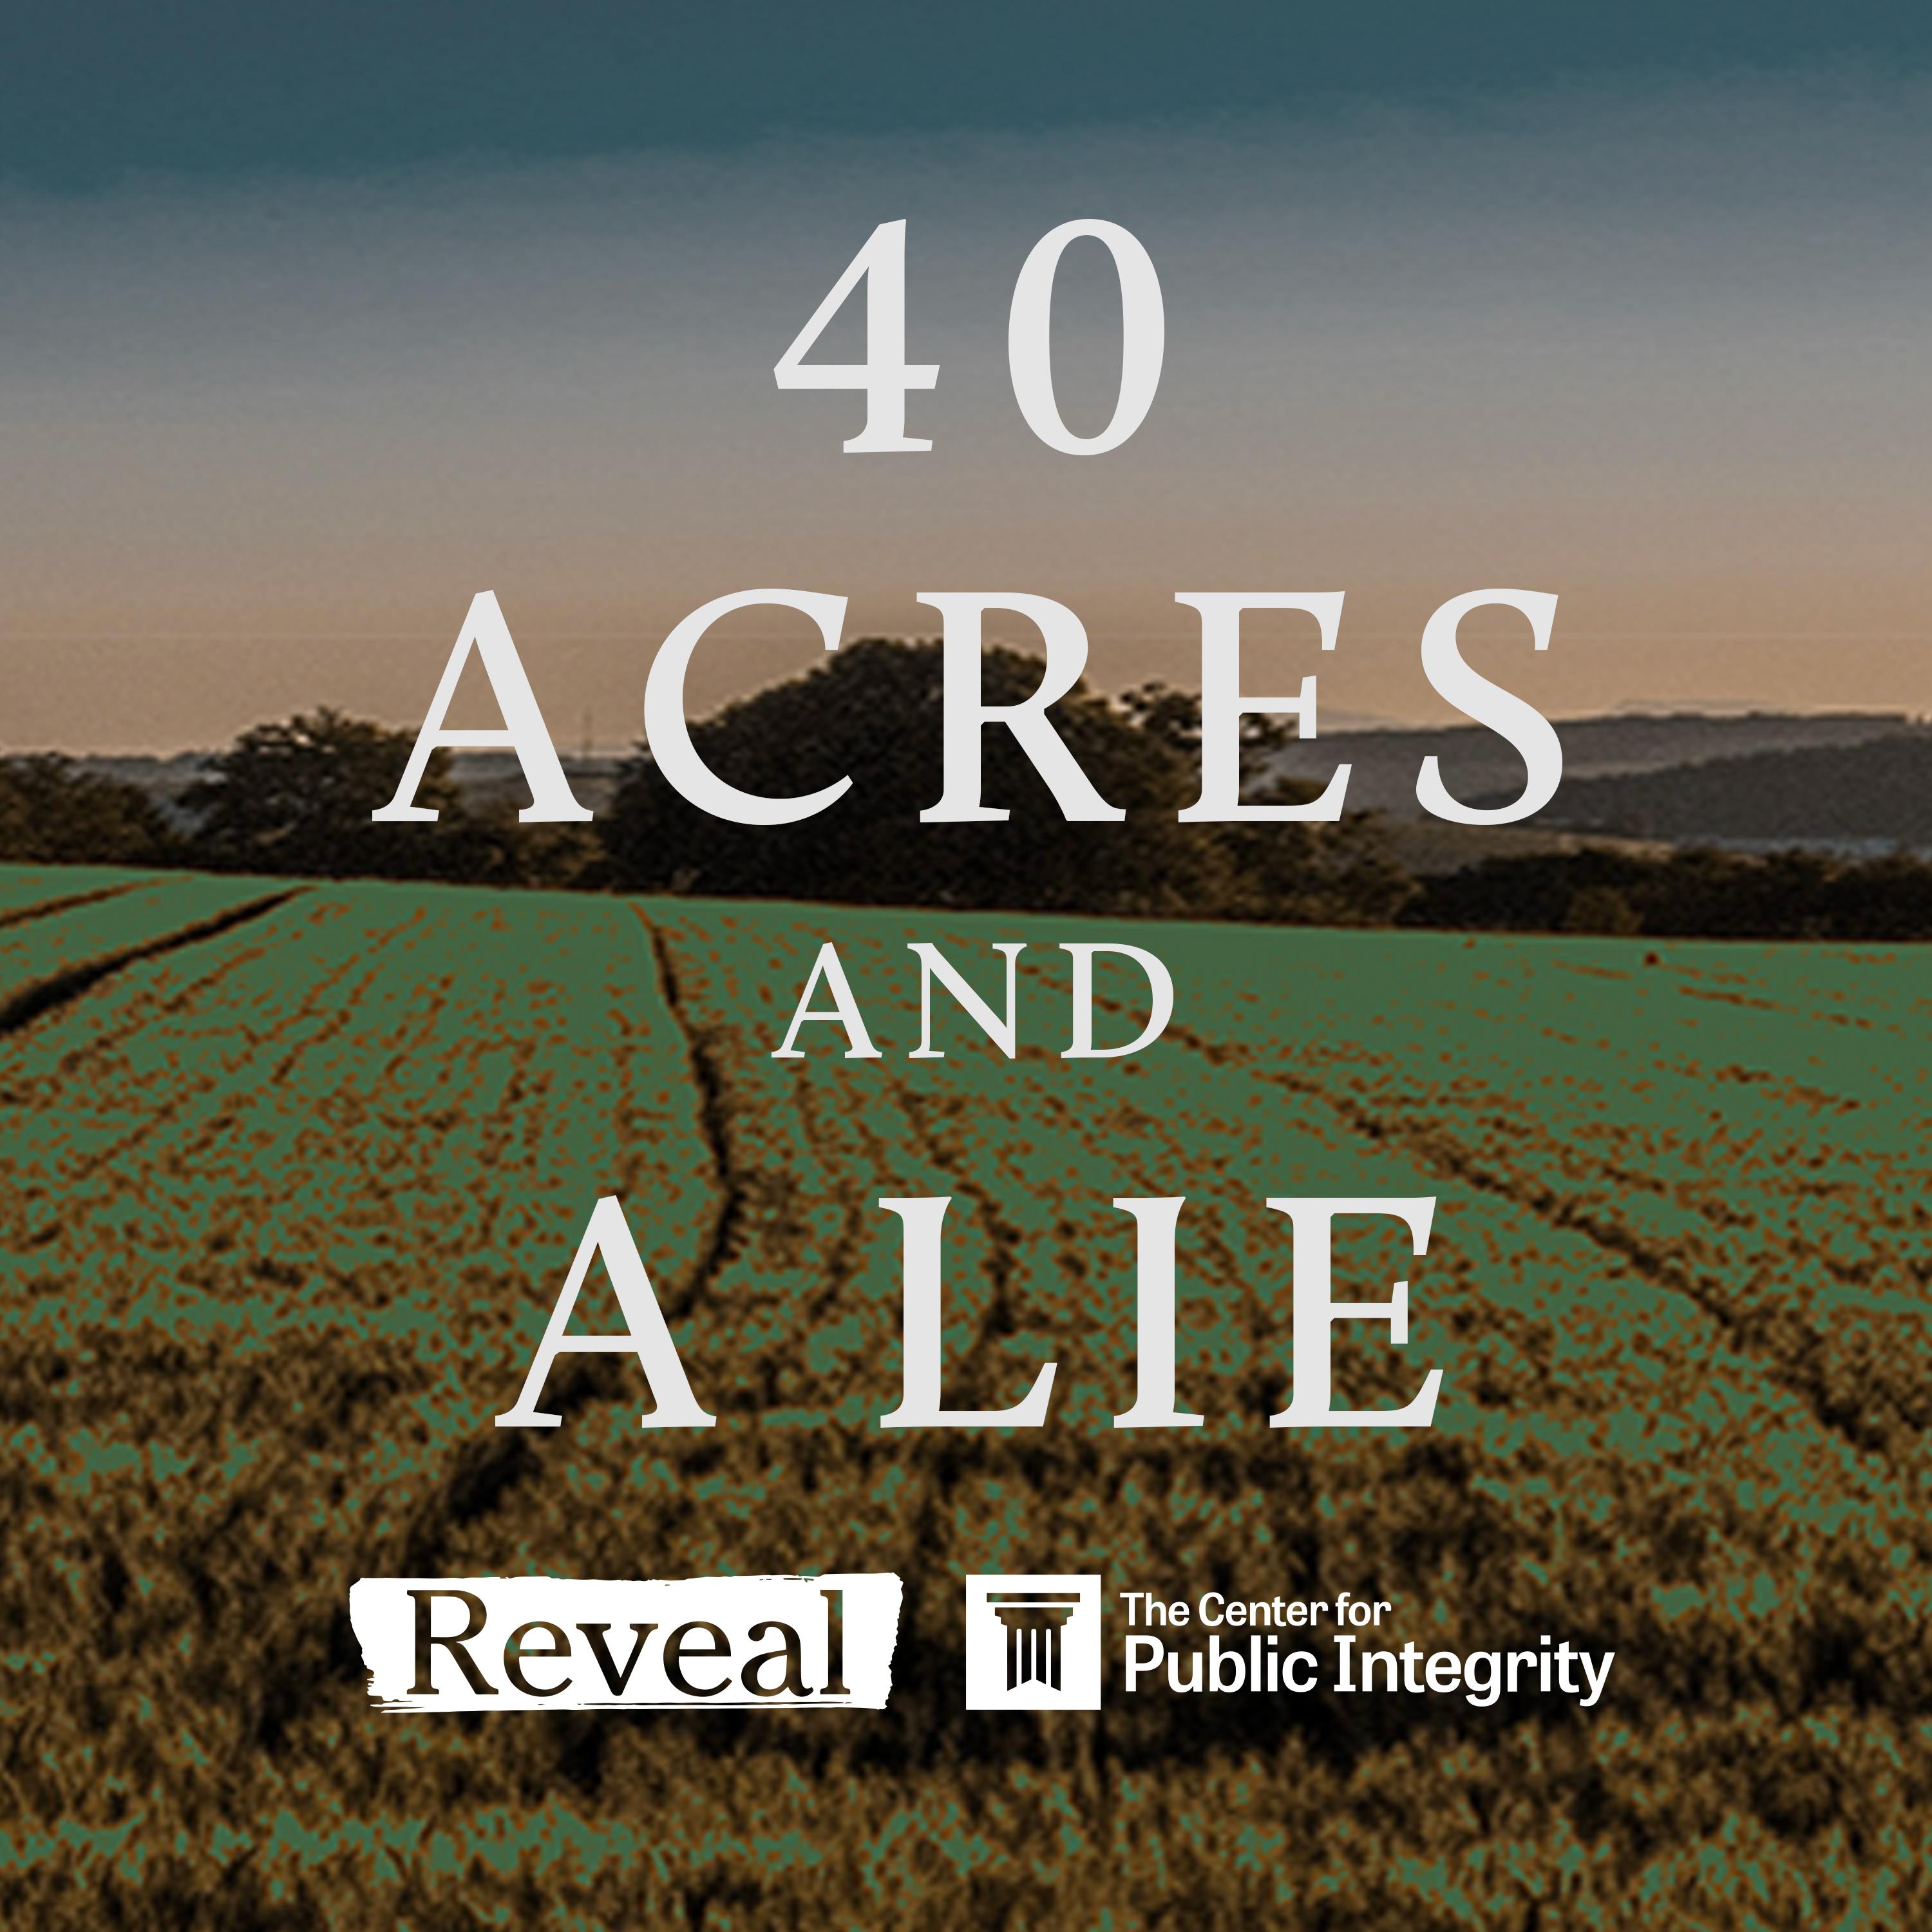 Thumbnail for "40 Acres and a Lie Part 3".